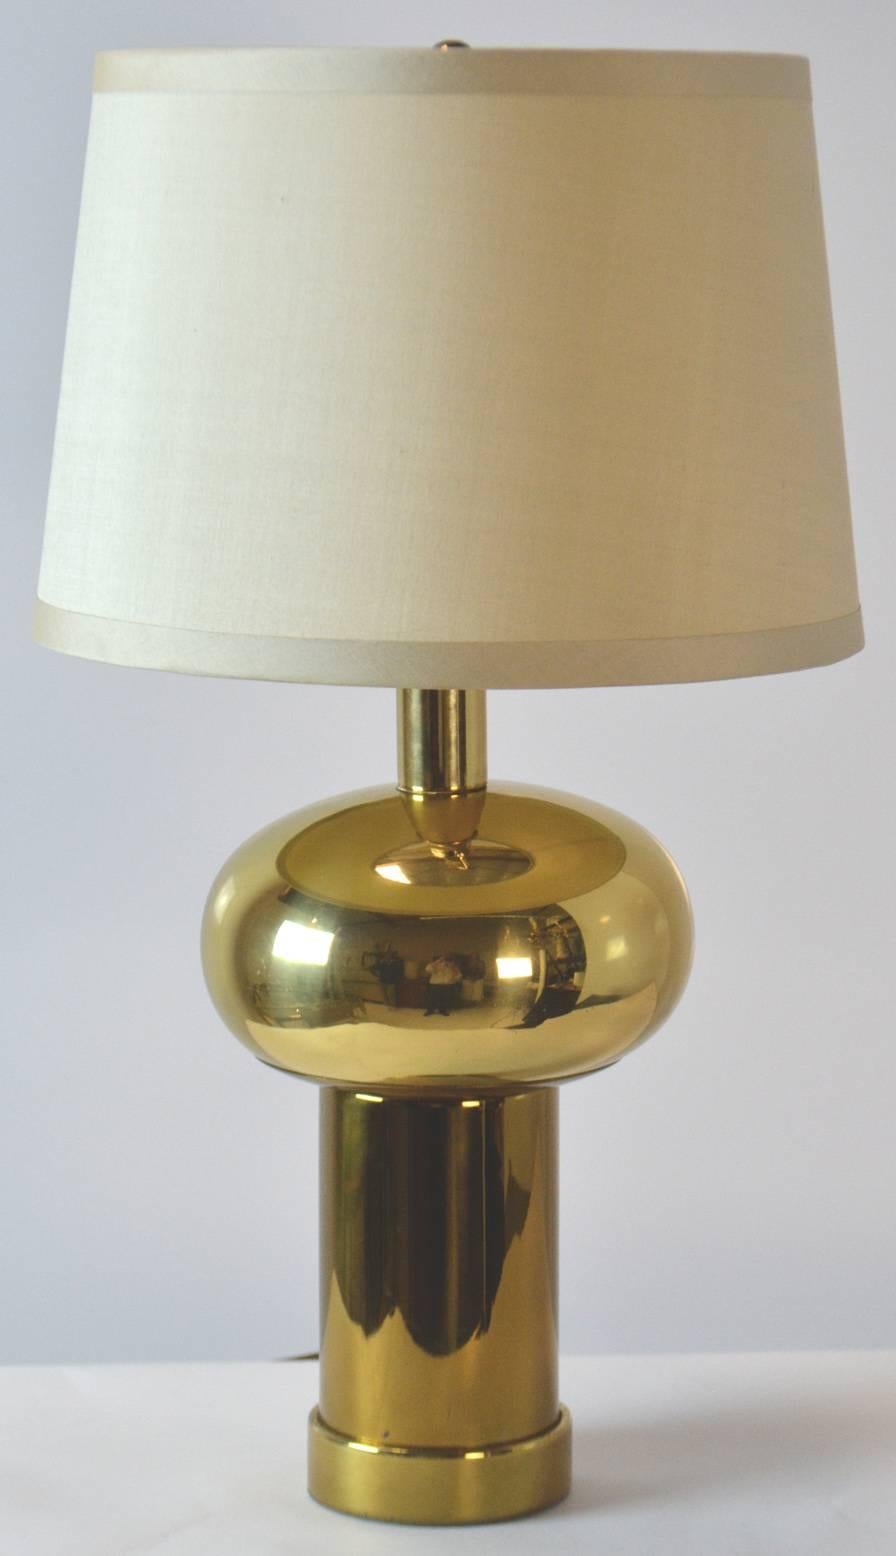 Pair of 1970s modernist brass lamps with Art Deco influence. A flattened sphere on a thick column with a ring base. Attributed to Westwood Industries. Shades for display only.